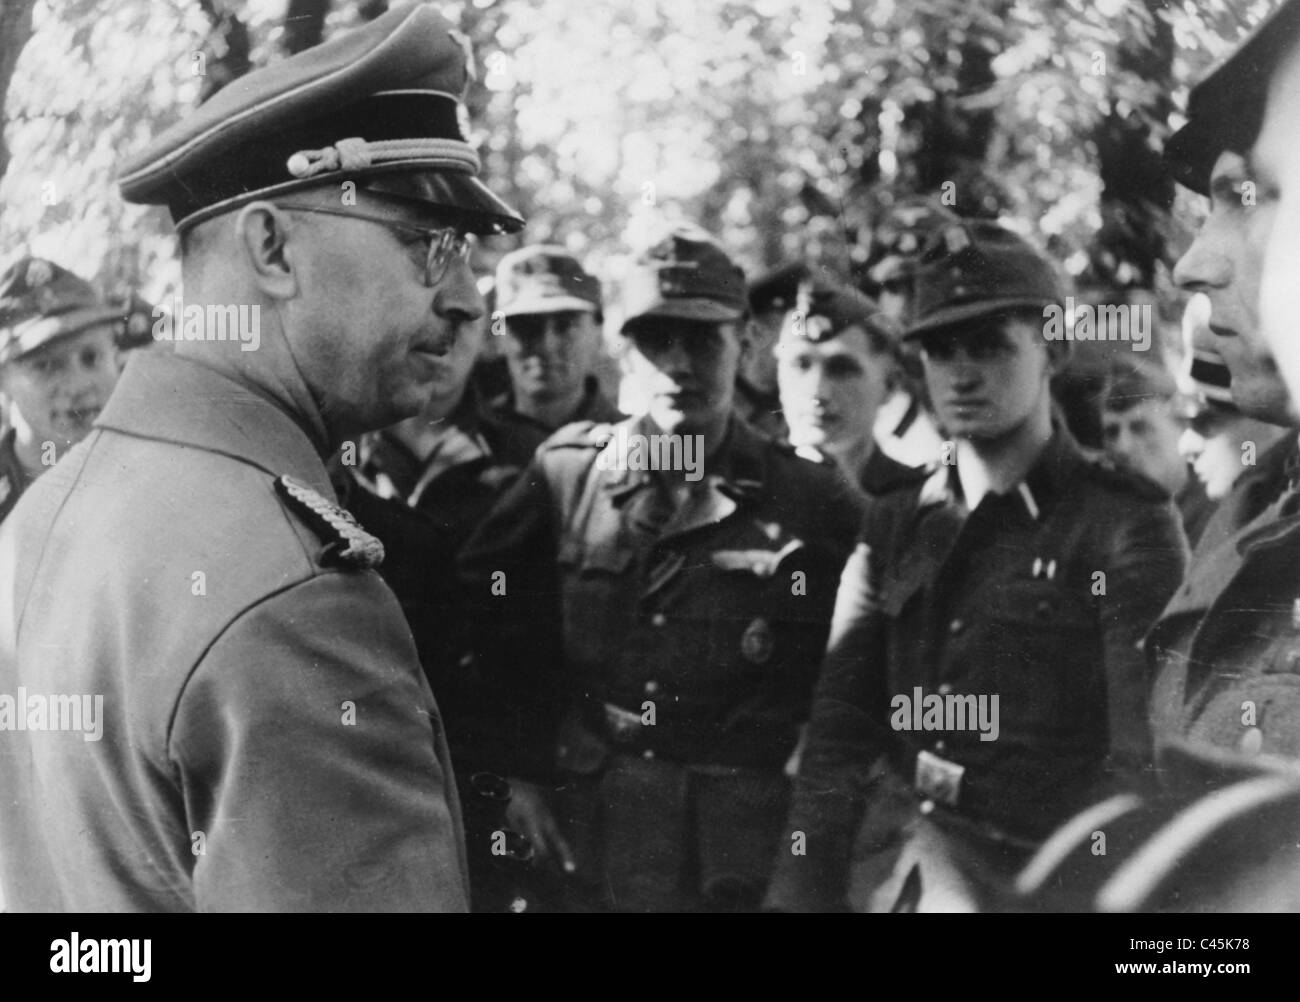 Heinrich Himmler speaking with Waffen SS soldiers, 1943 Stock Photo